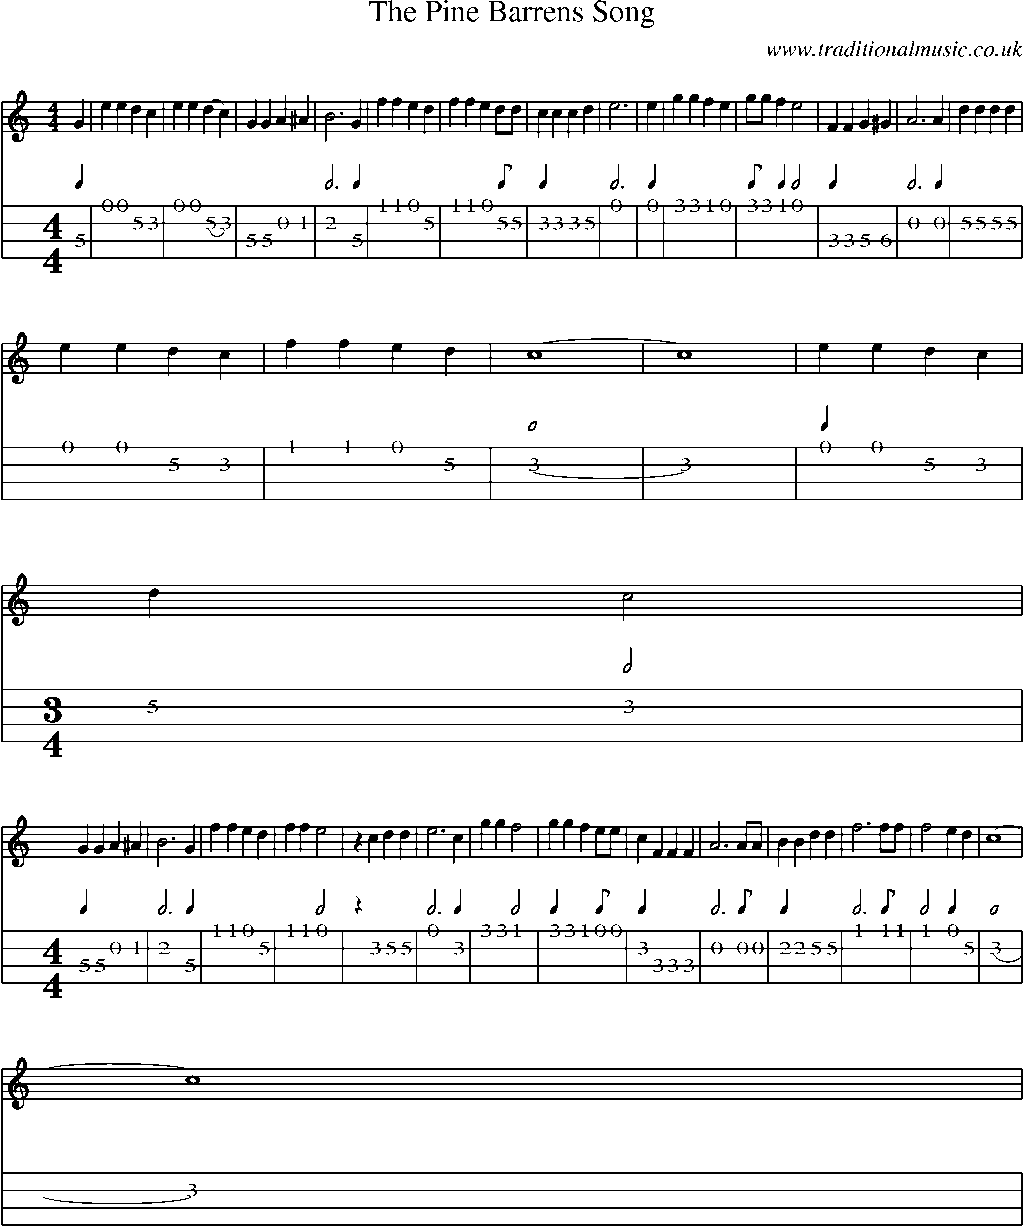 Mandolin Tab and Sheet Music for The Pine Barrens Song